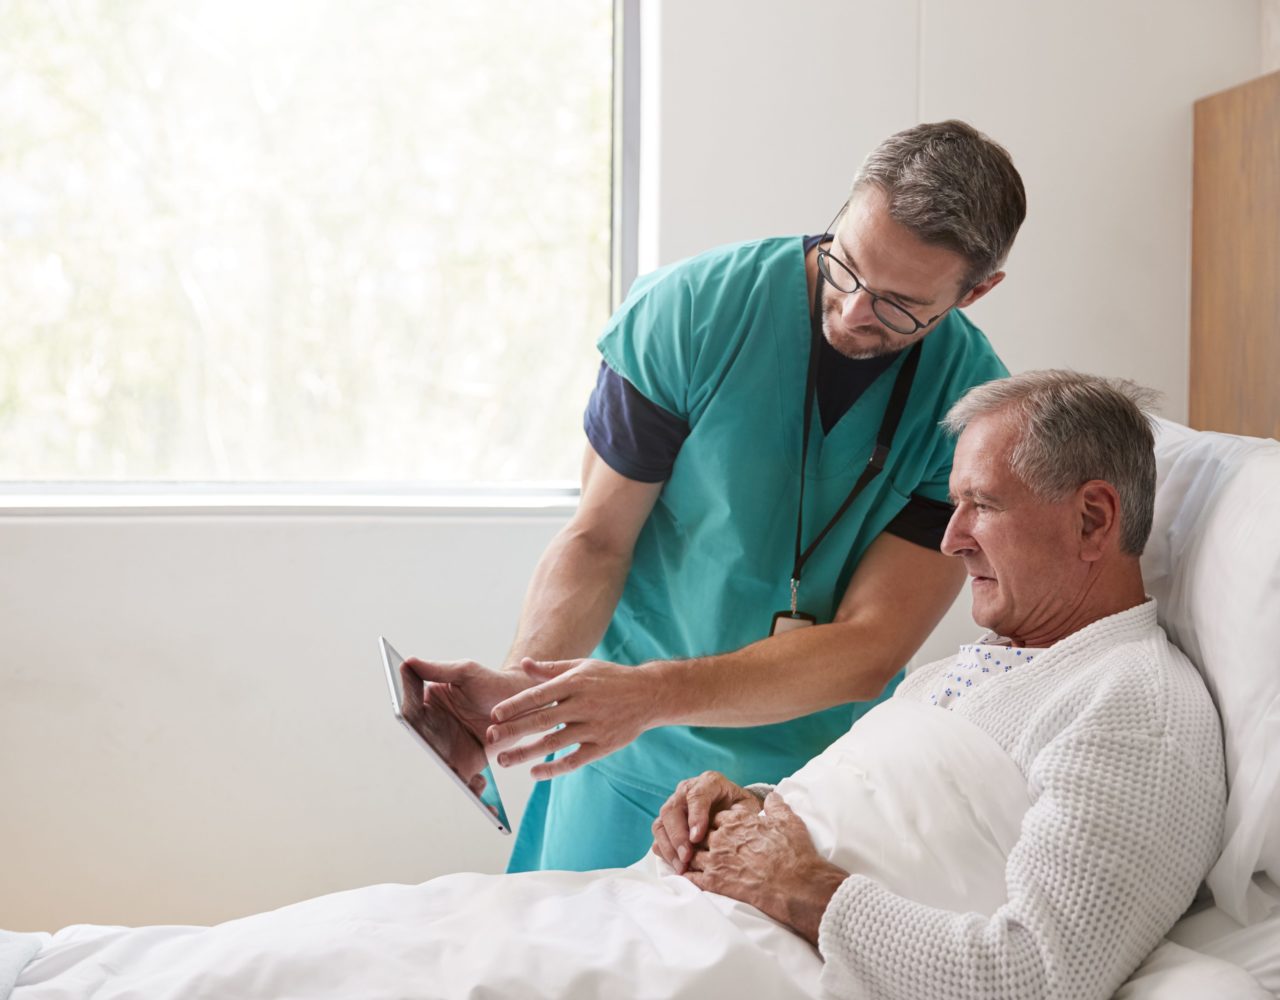 A doctor showing digital reports to his patient